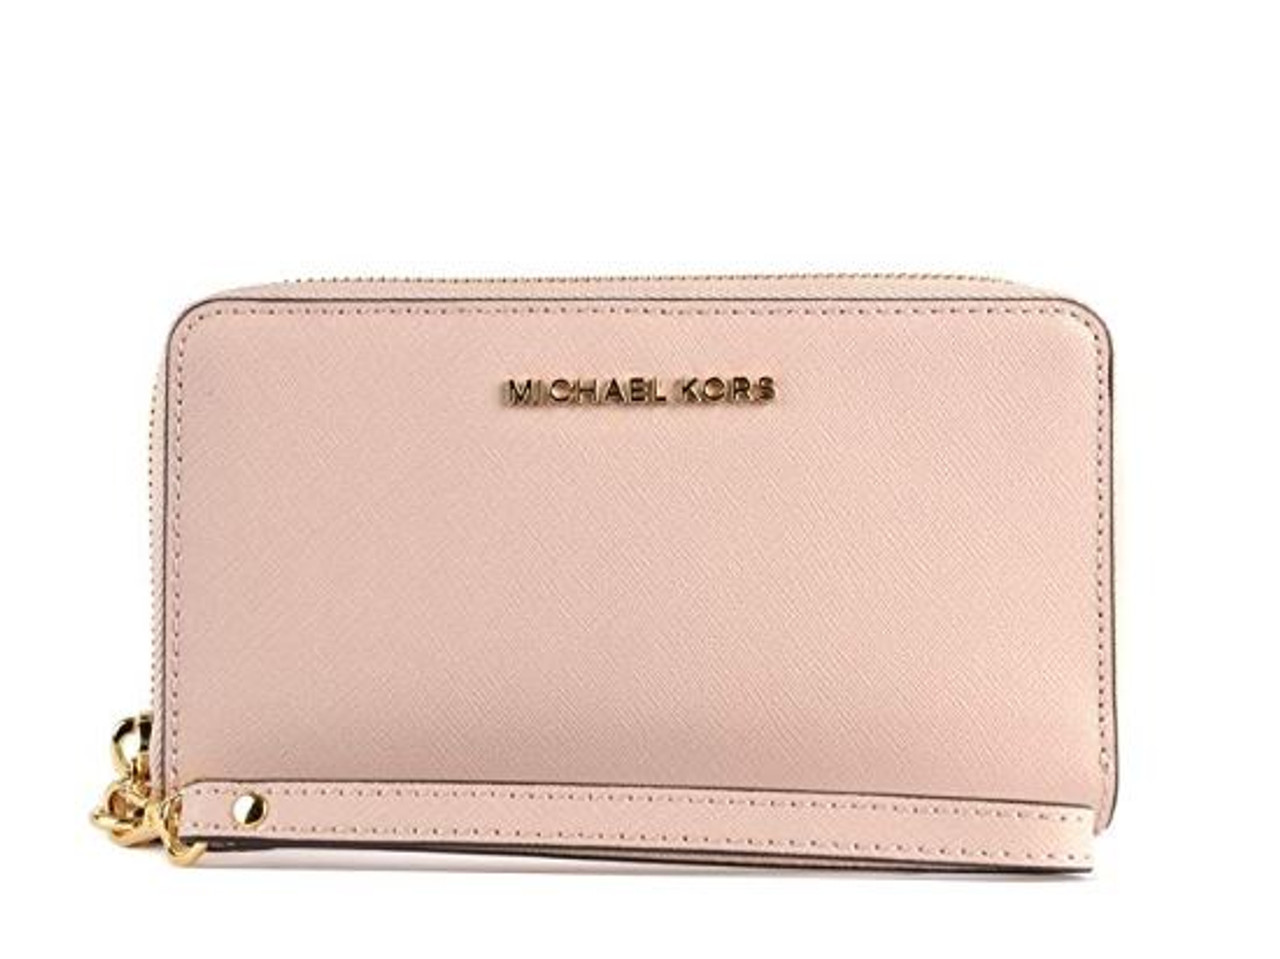 Michael Kors Soft Pink Saffiano Leather Multifunction Travel Tote